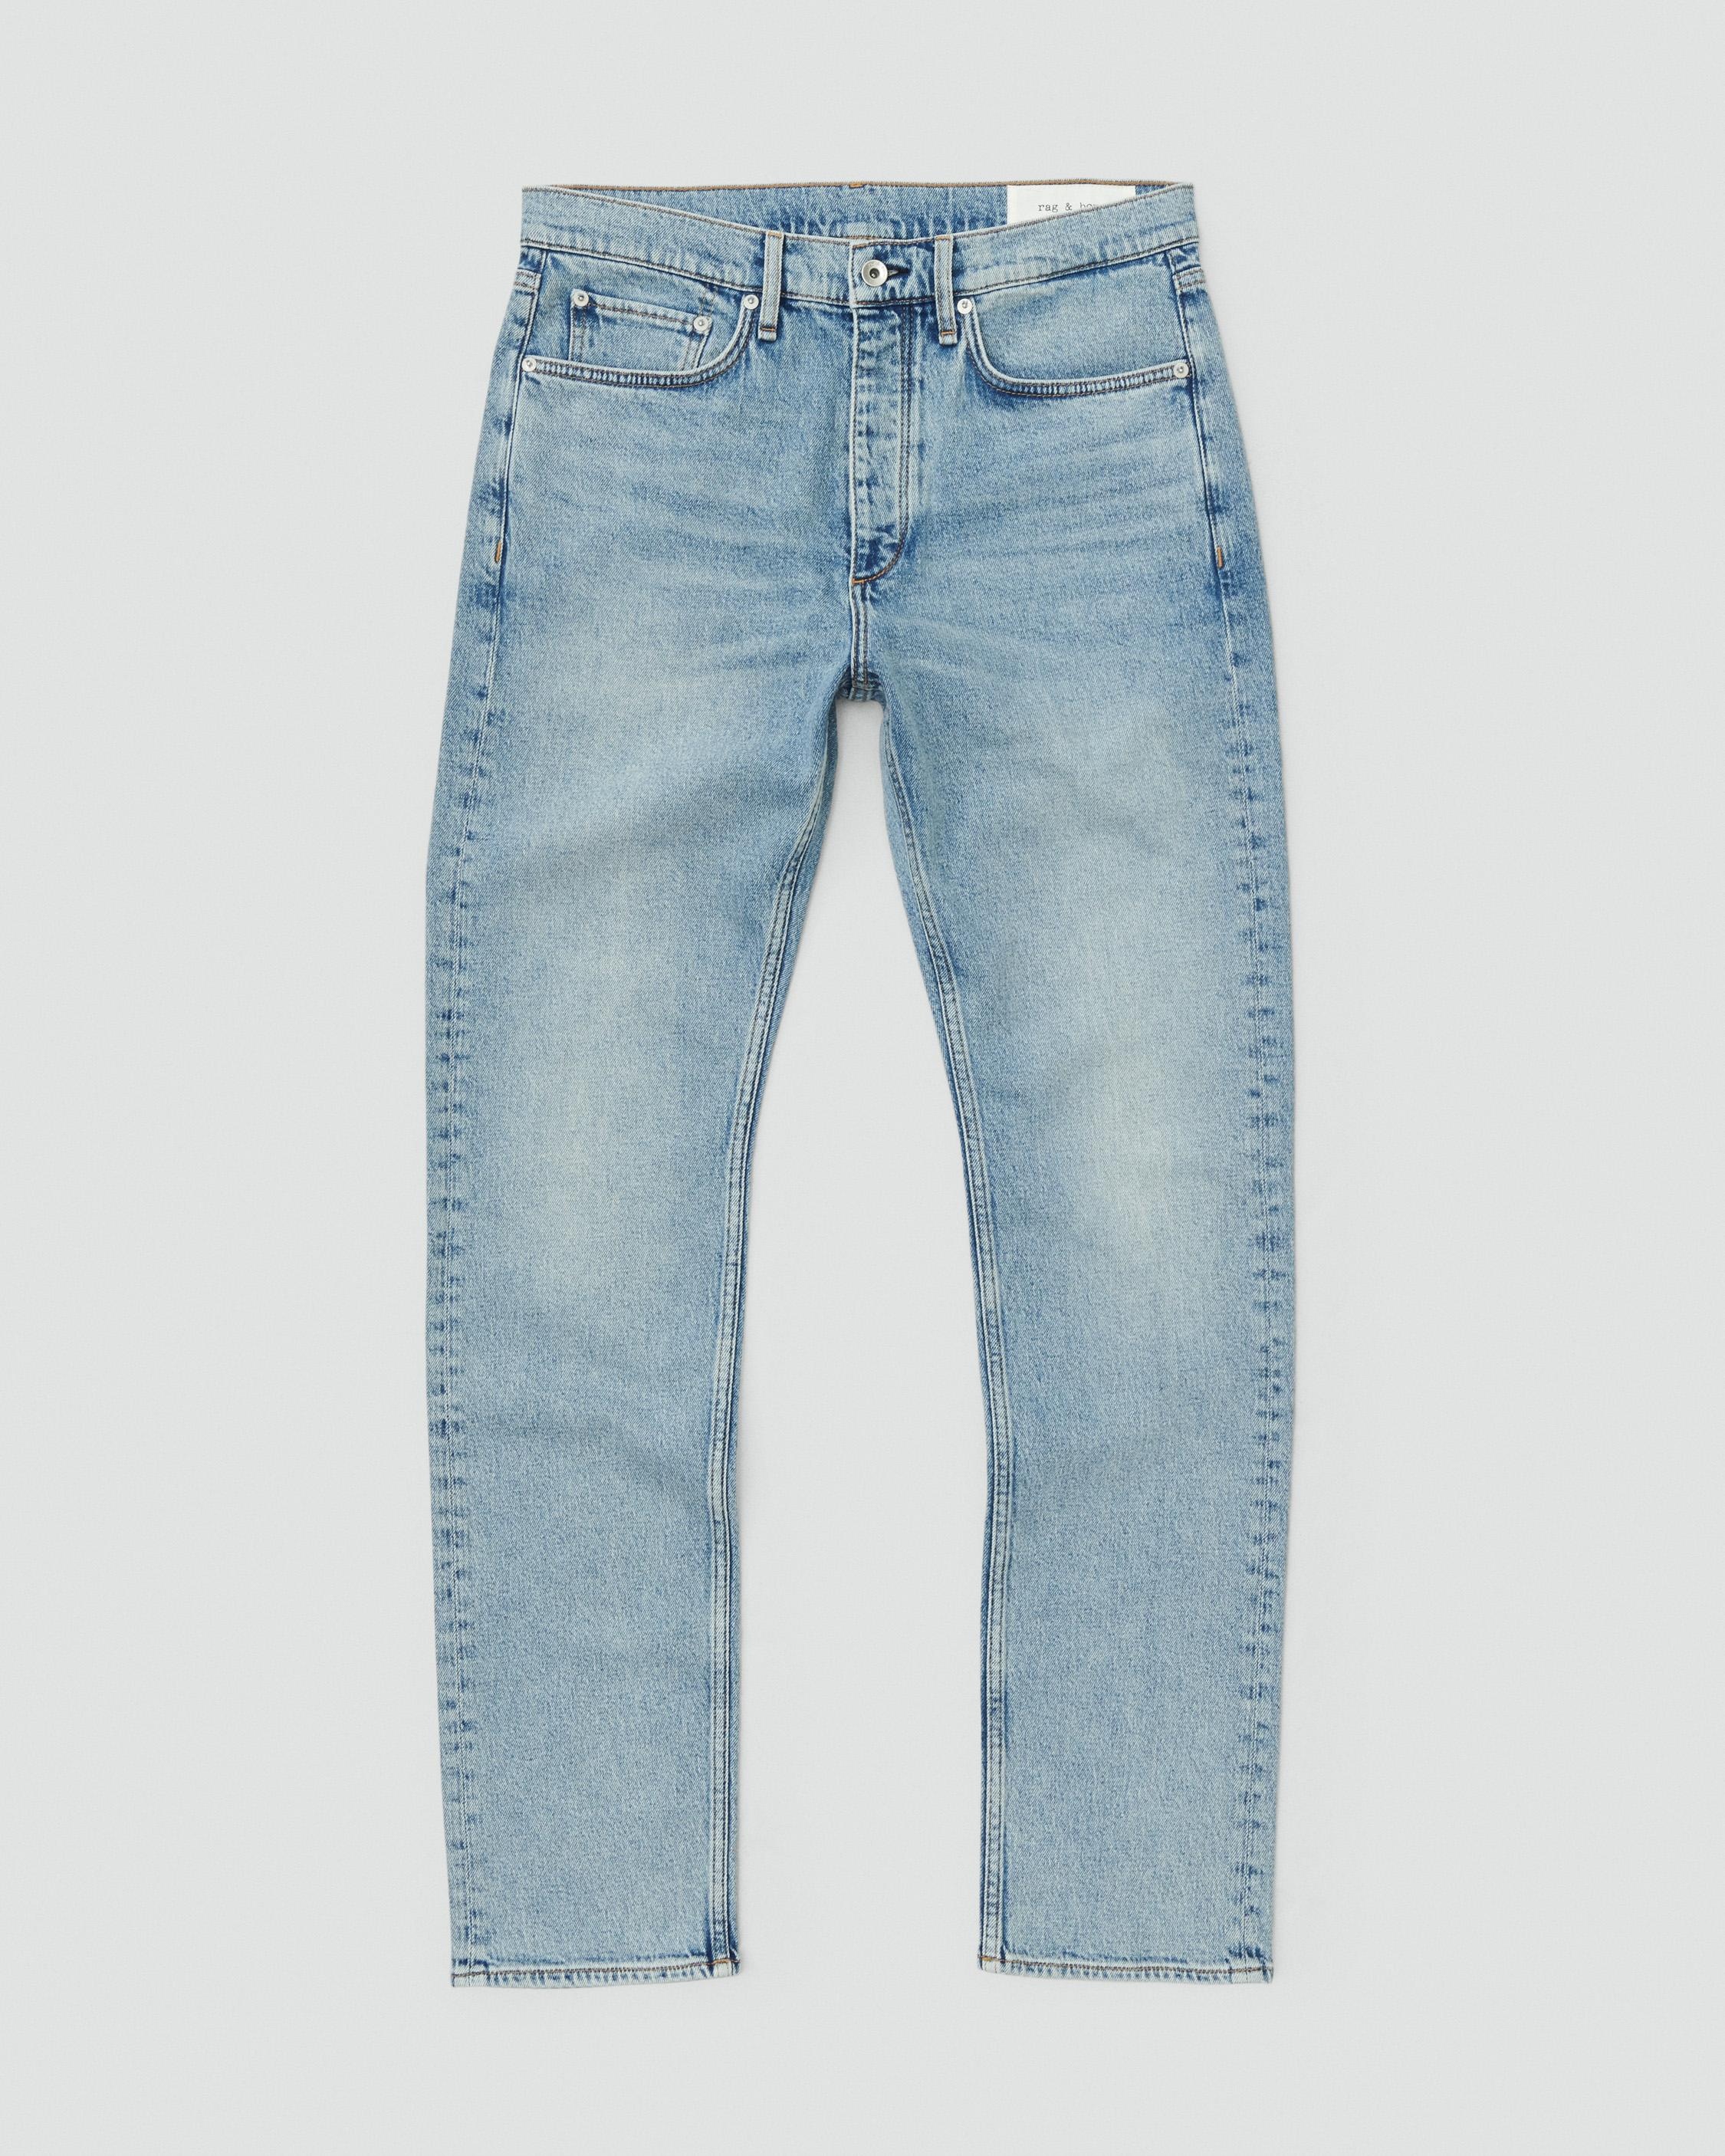 Fit 4 - Windsor
Straight Fit Authentic Rigid Jean - 1